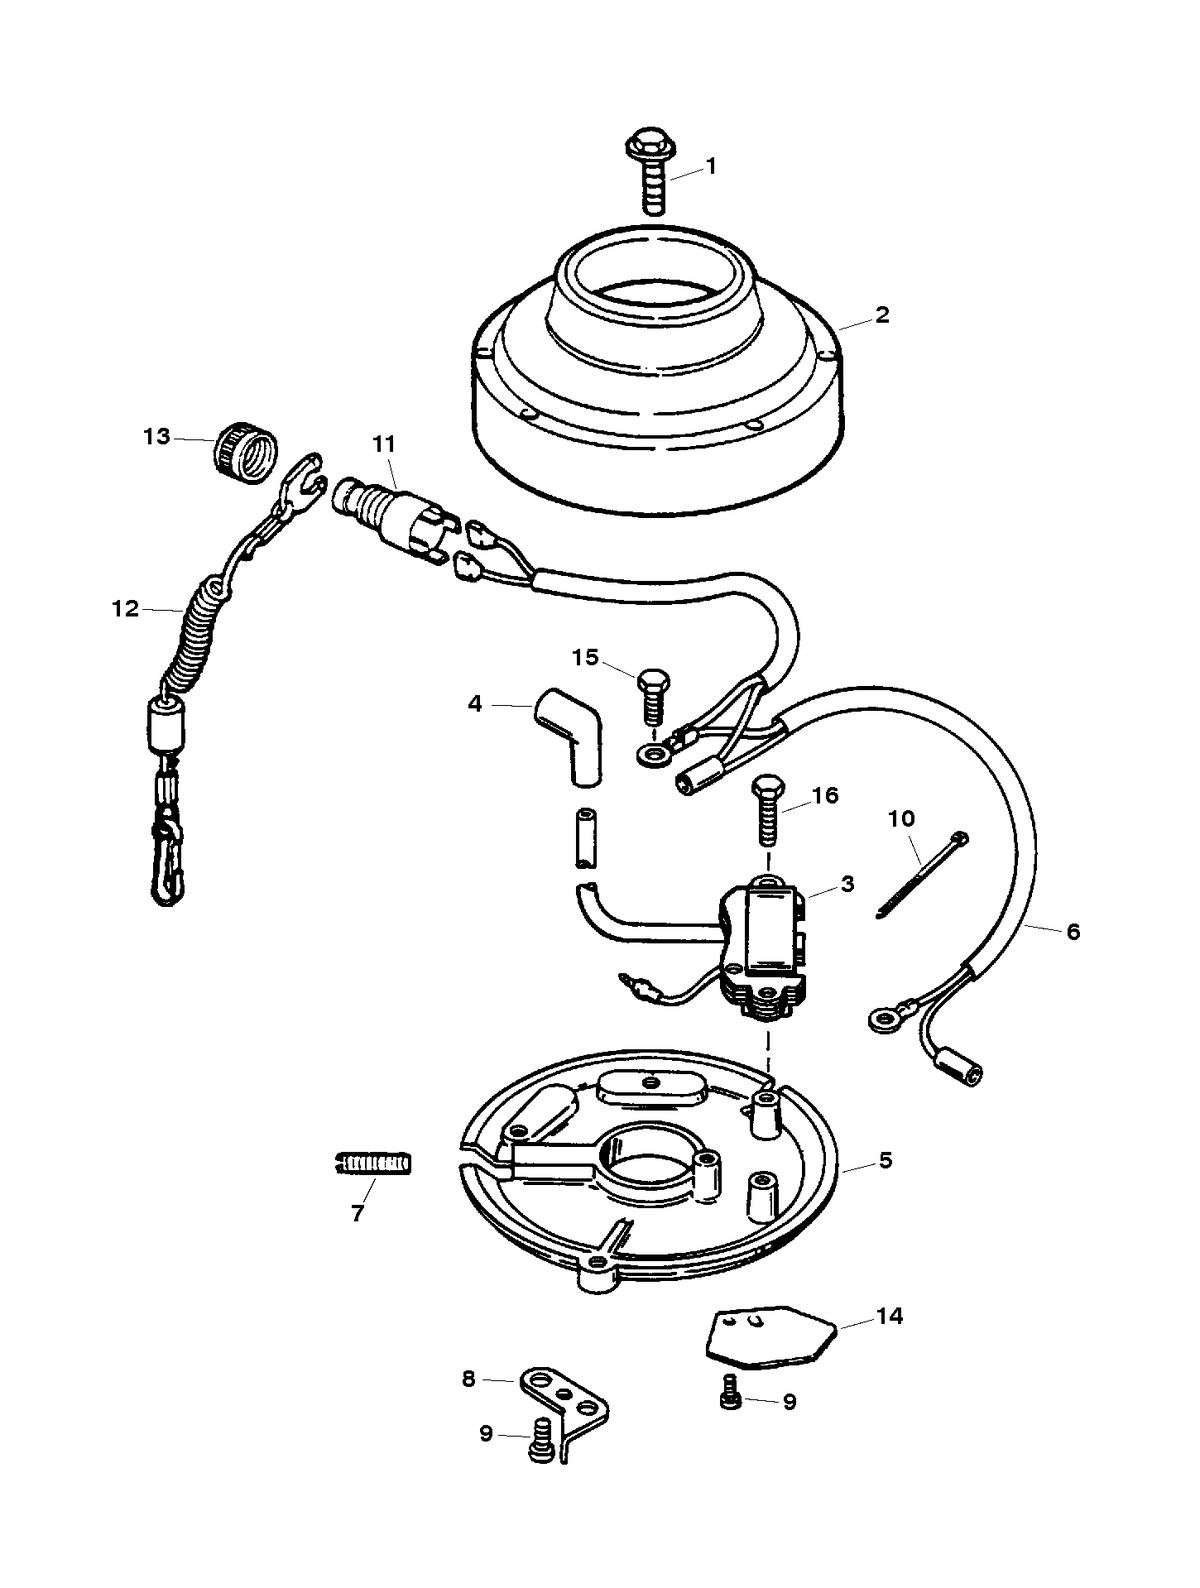 FORCE 5 H.P. IGNITION SYSTEM